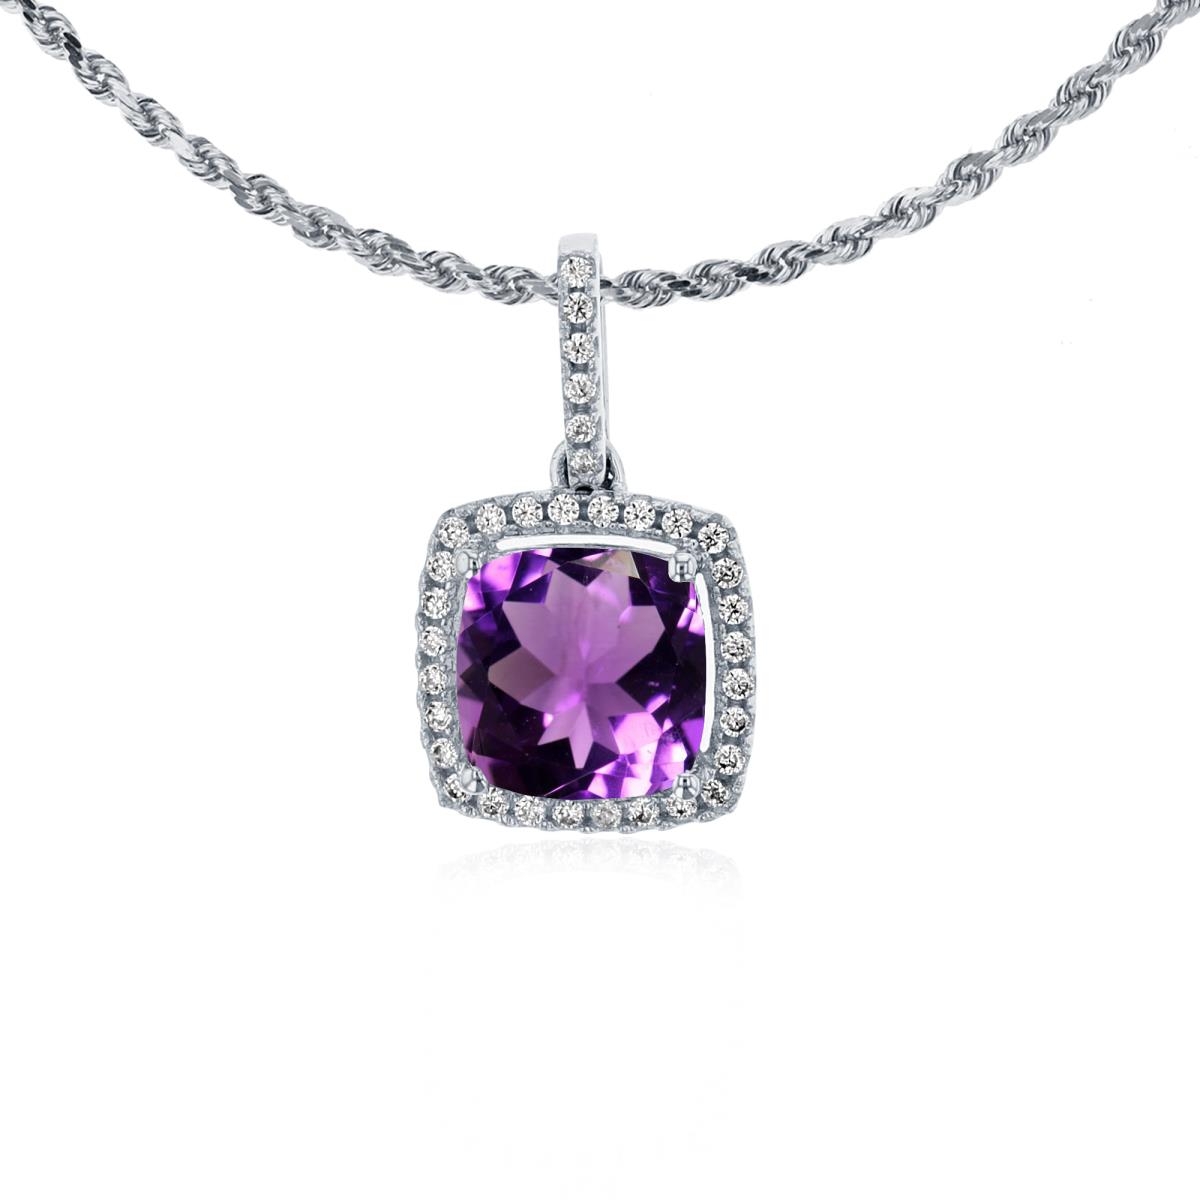 14K White Gold 7mm Cushion Amethyst & 0.14 CTTW Rnd Diamond Halo 18" Rope Chain Necklace